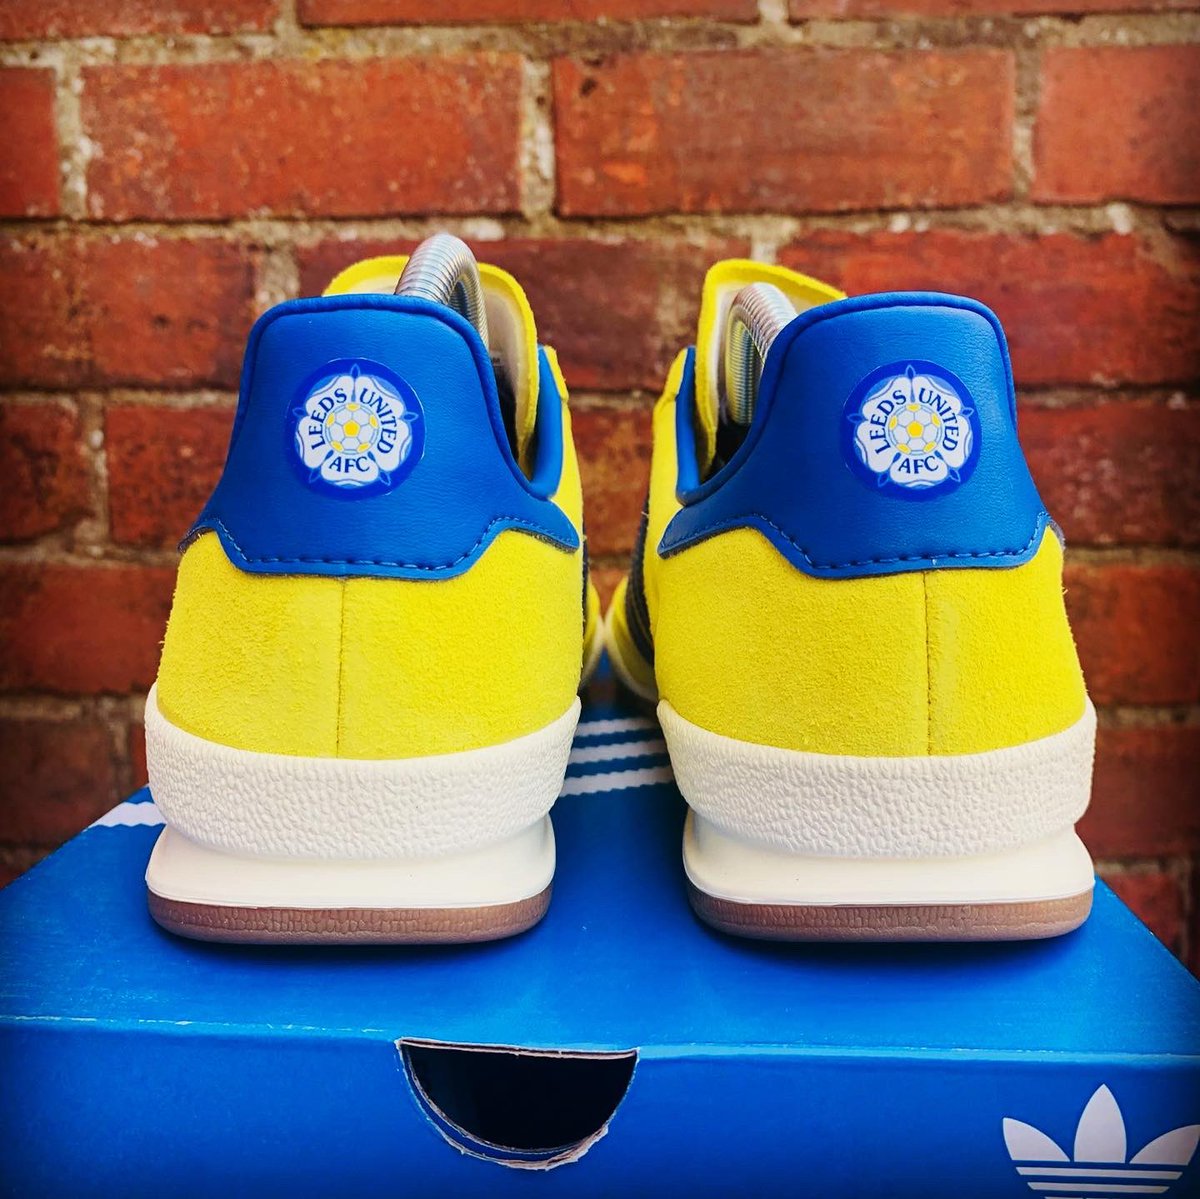 MARCHING ON TOGETHER 💛💙 • Here’s some “Dirty Leeds” customs completed using a pair of adidas Jeans for one of my top customers @dannyblufc 👟 A subtle custom using a couple of club badges to keep that terrace look 👌🏻 • #lufc #leeds #MOT #leedsunited #leedsutd #elandroad